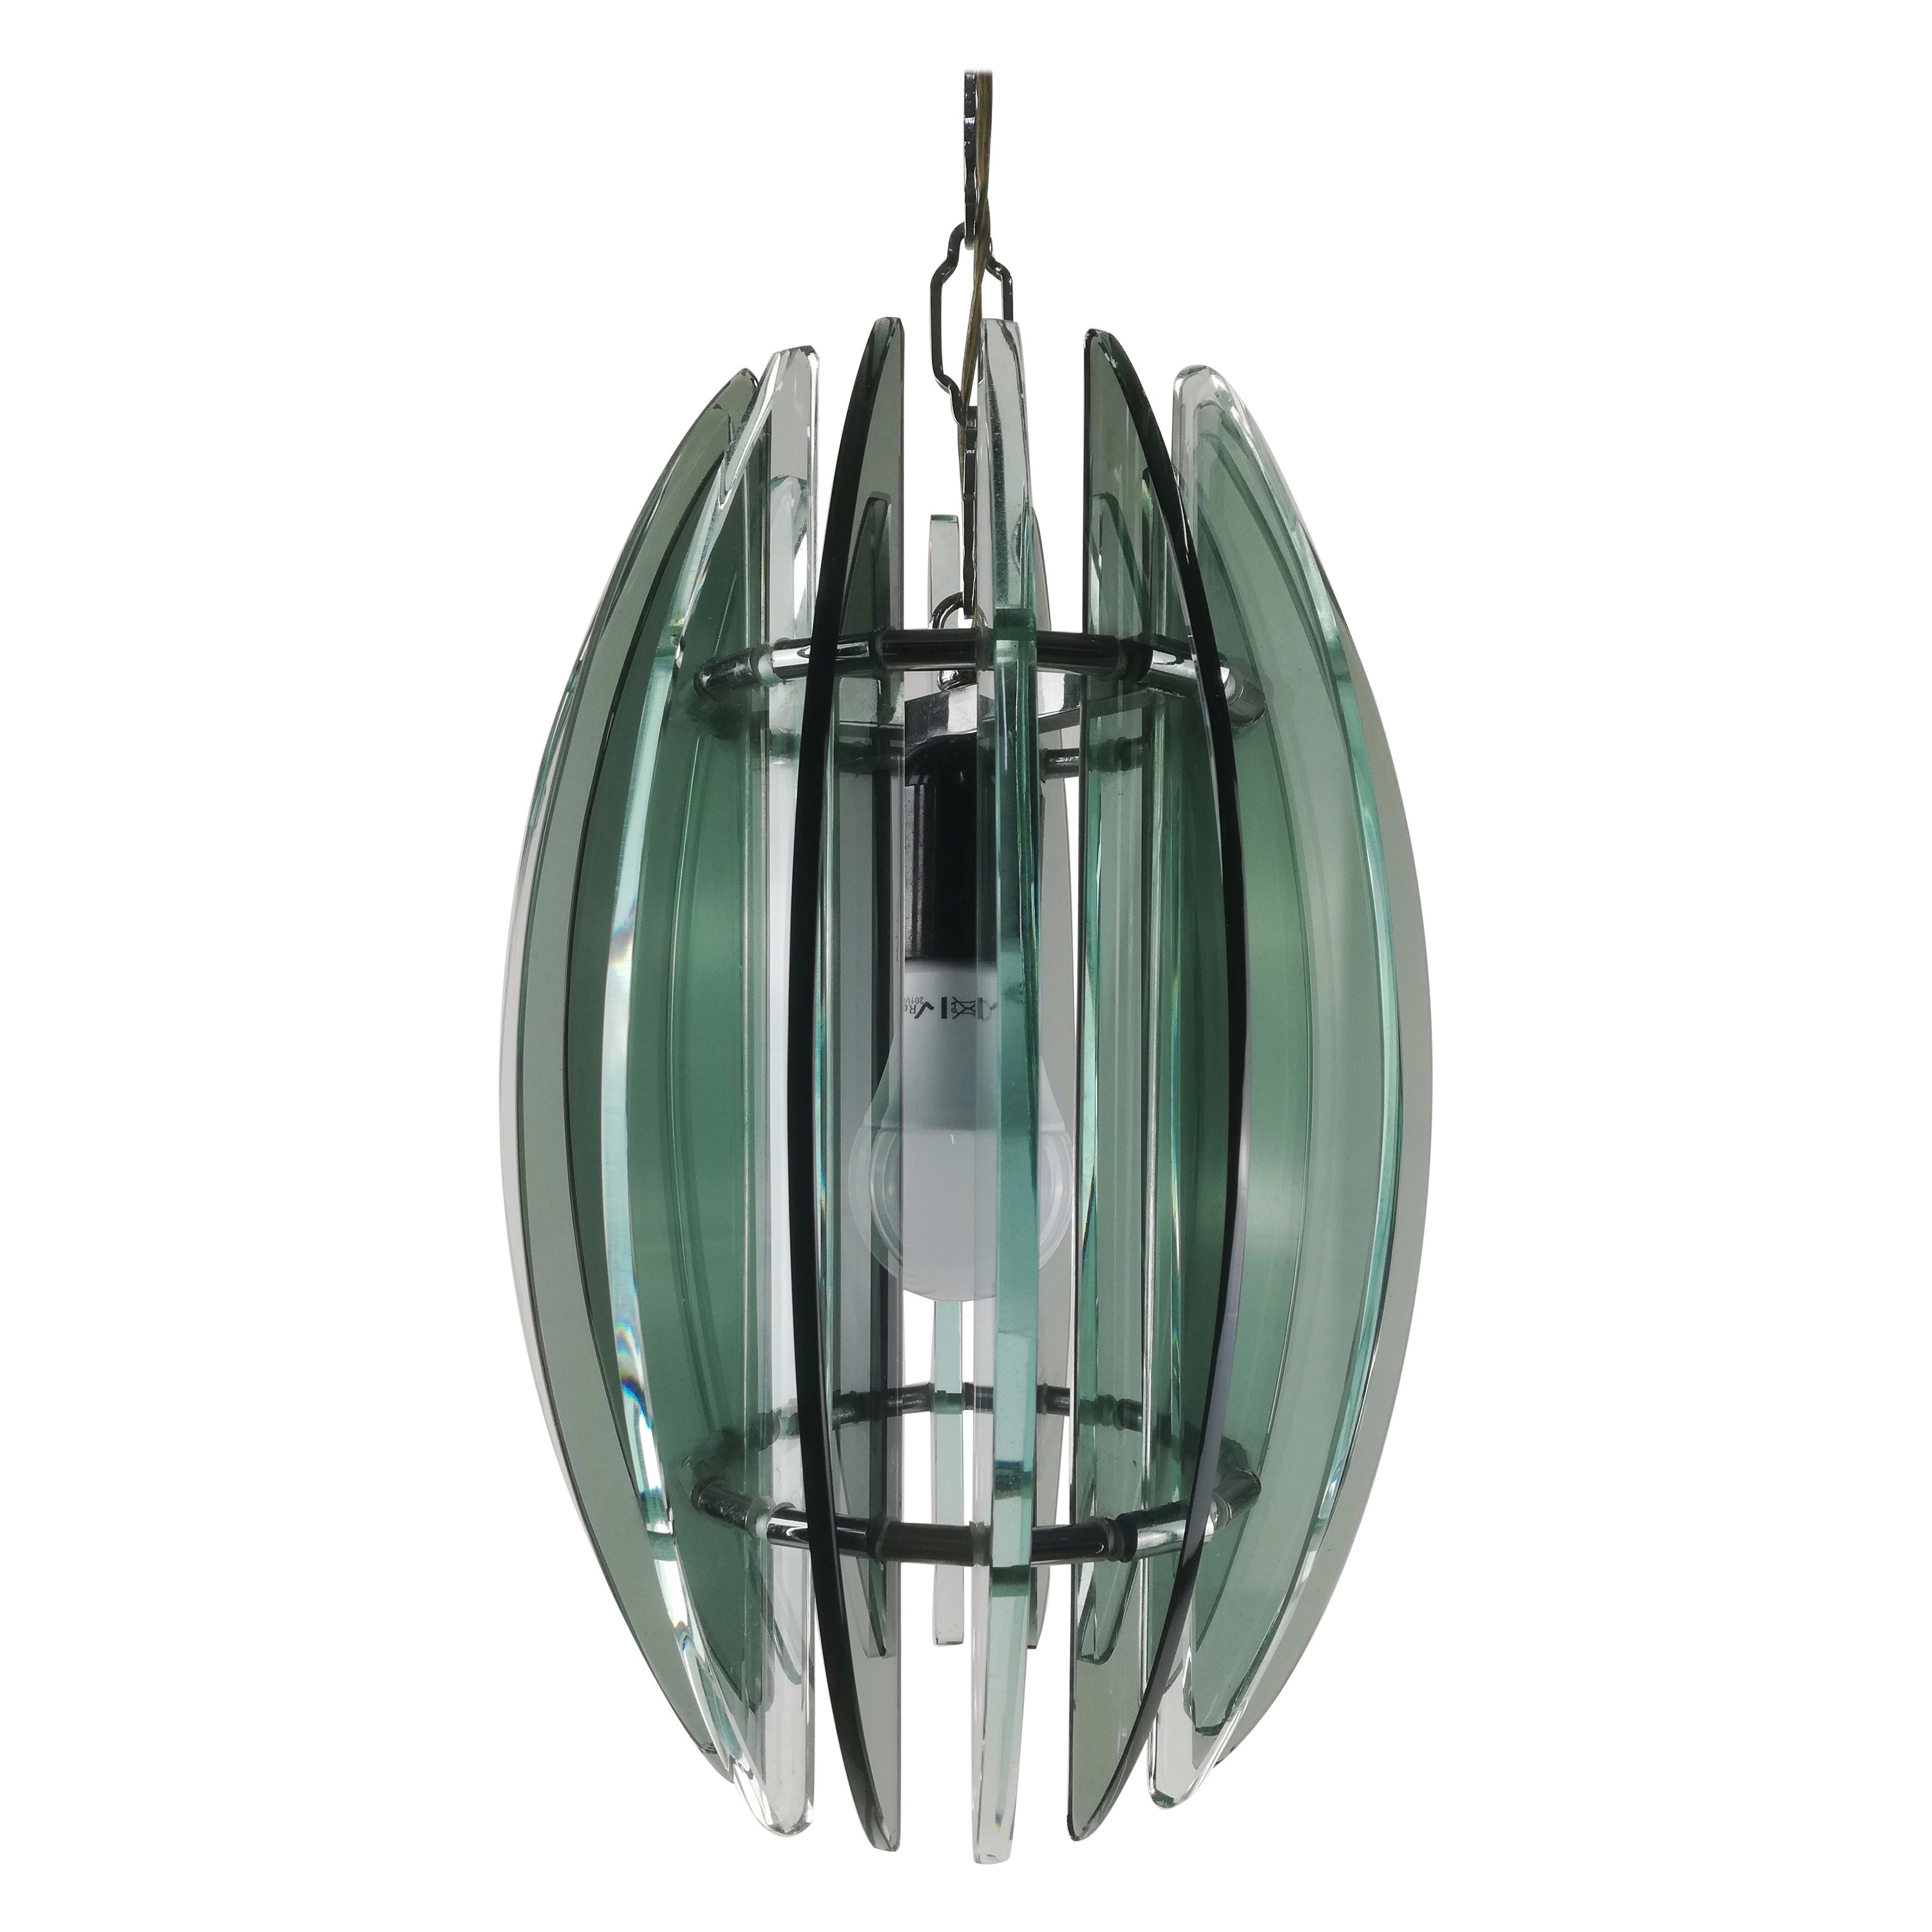 Italian Mid-Century Modern Chandelier by Veca in Fumè and Turquoise Glass For Sale